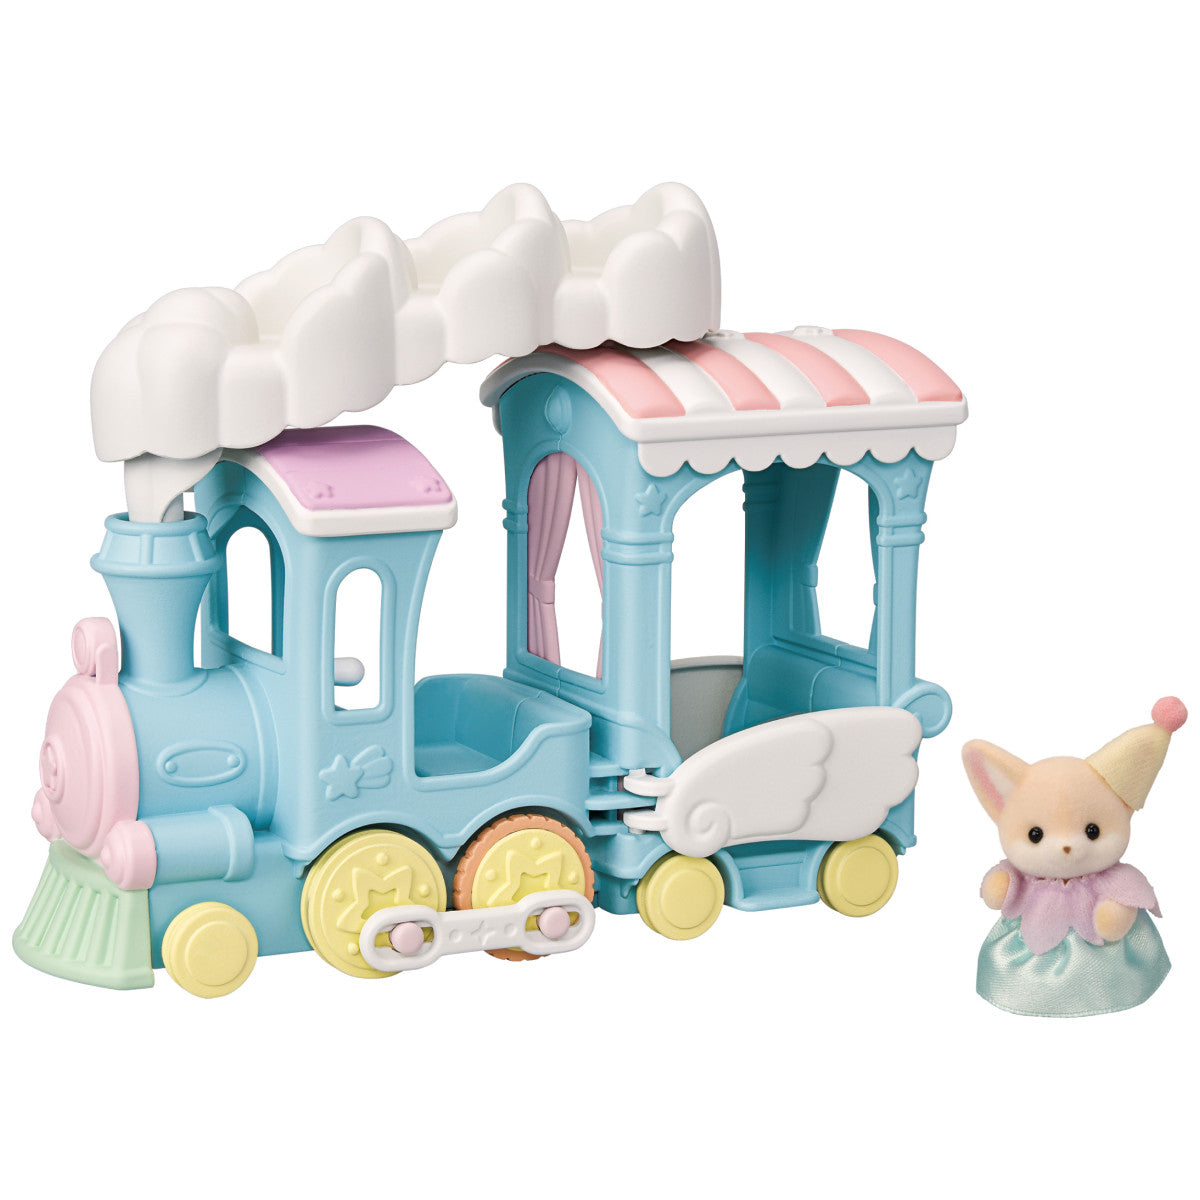 Calico Critters - Floating Cloud Rainbow Train